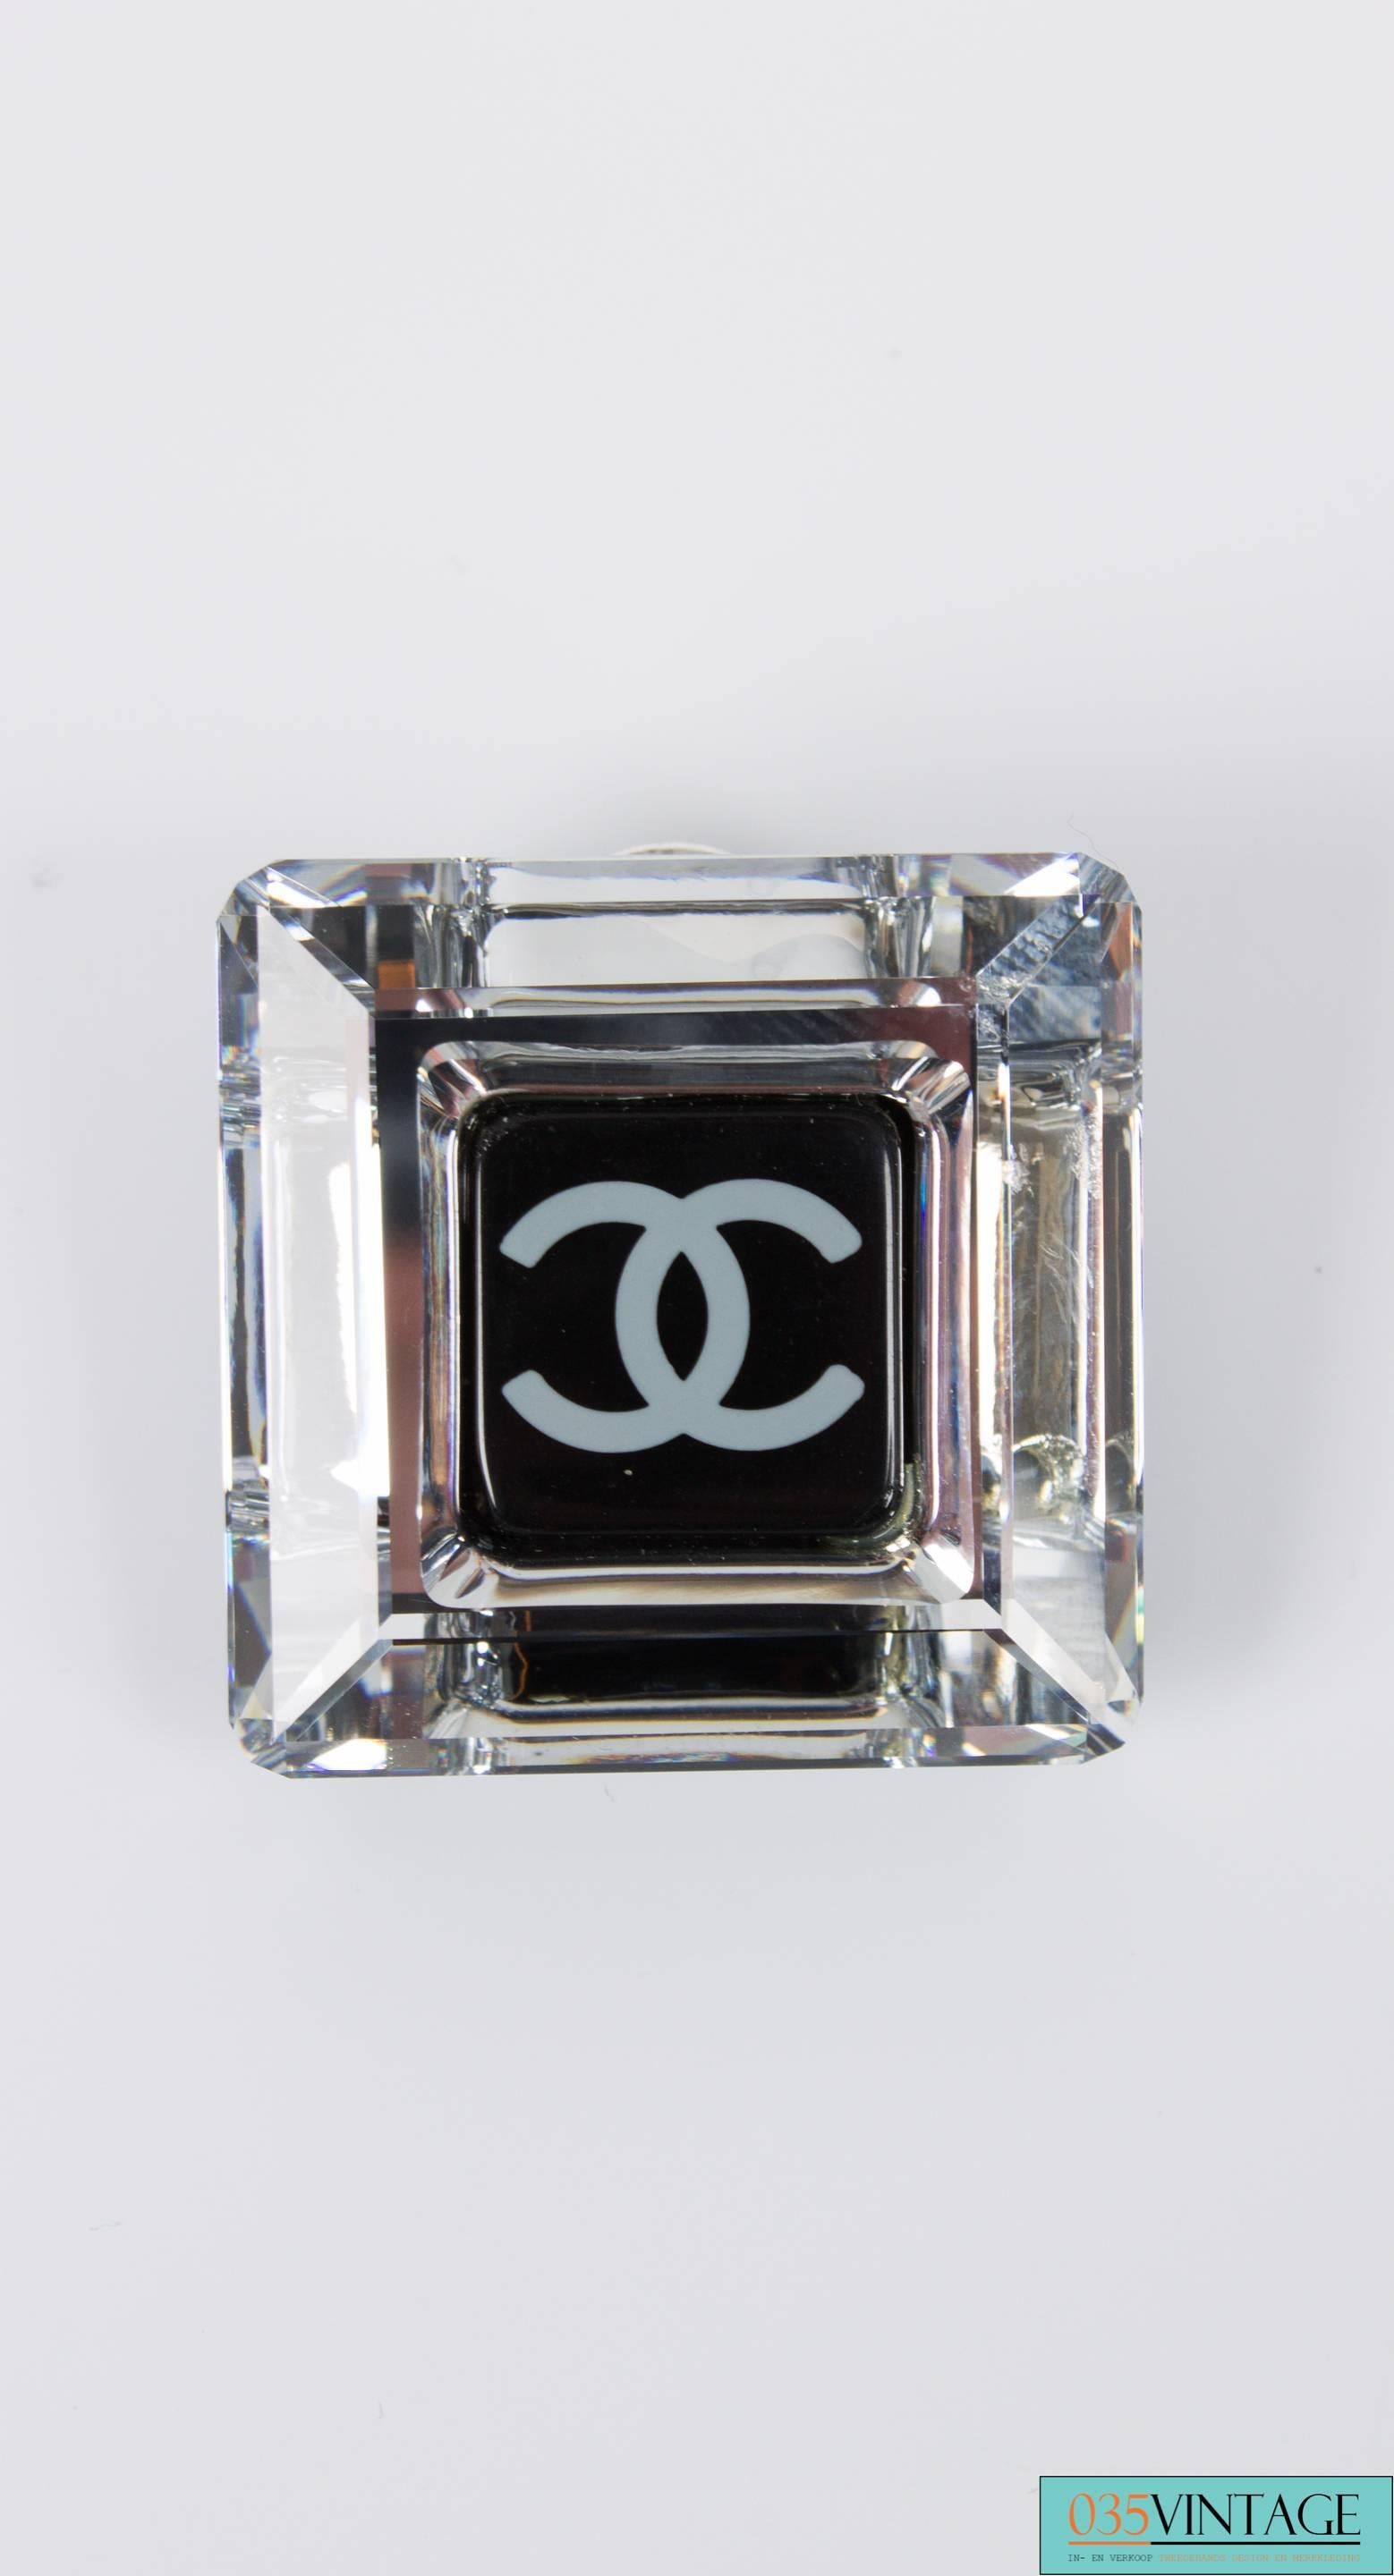 This jewelry set in black and white is chic and timeless, Chanel calls this Black & White Crystal Cube. It's from the 2006 Cruise Collection.

The crystal cube ornament (2x2 cm) has a white interlocking CC logo in the center and hangs down from a